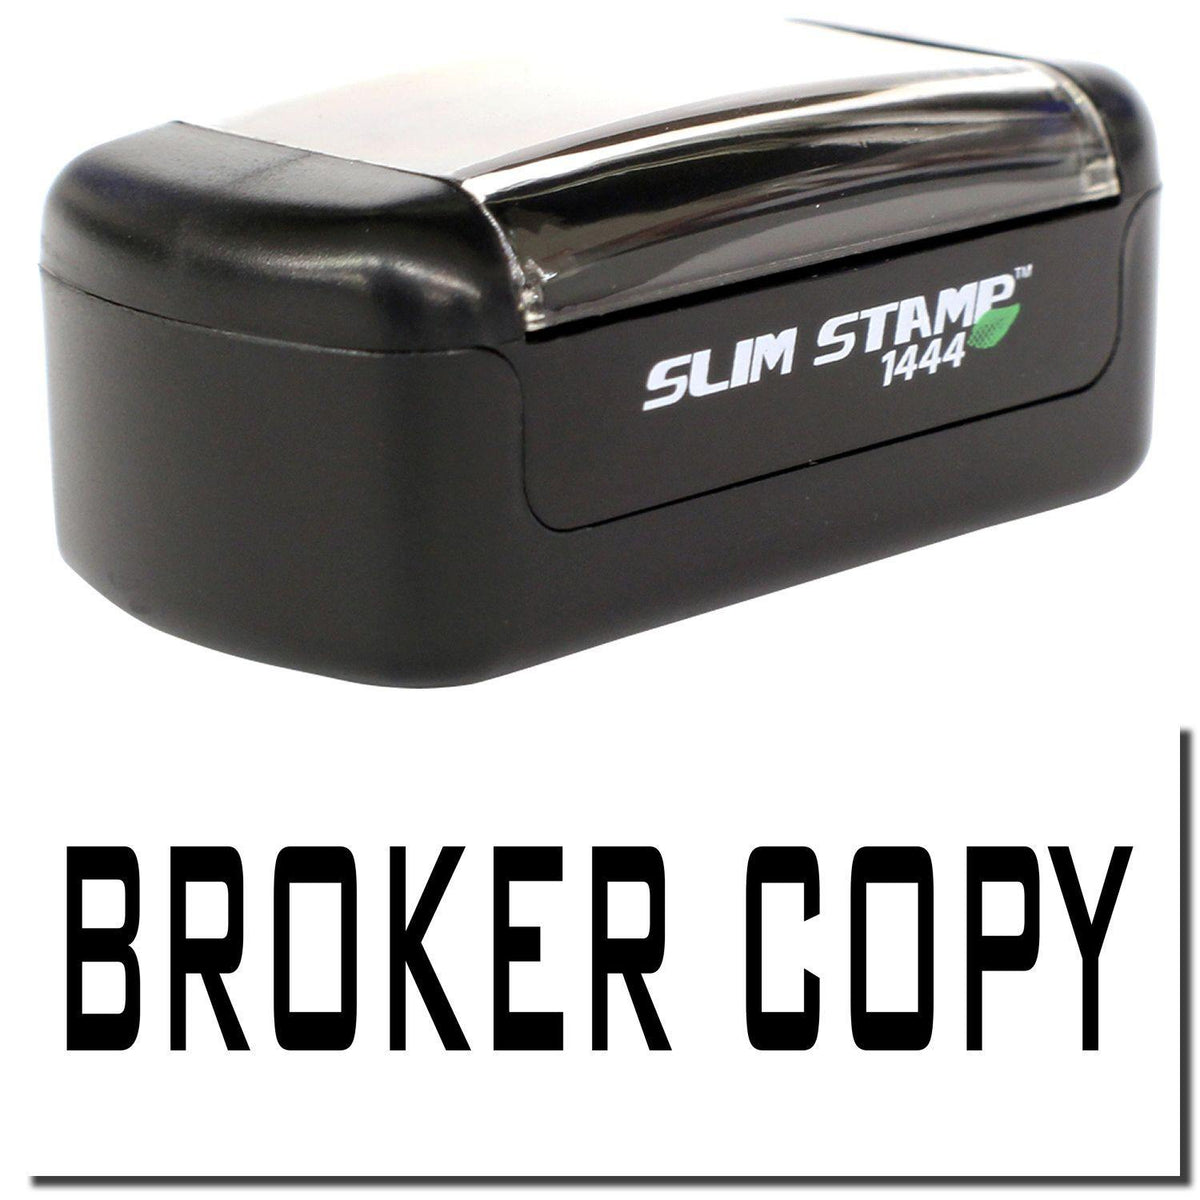 A stock office pre-inked stamp with a stamped image showing how the text &quot;BROKER COPY&quot; is displayed after stamping.